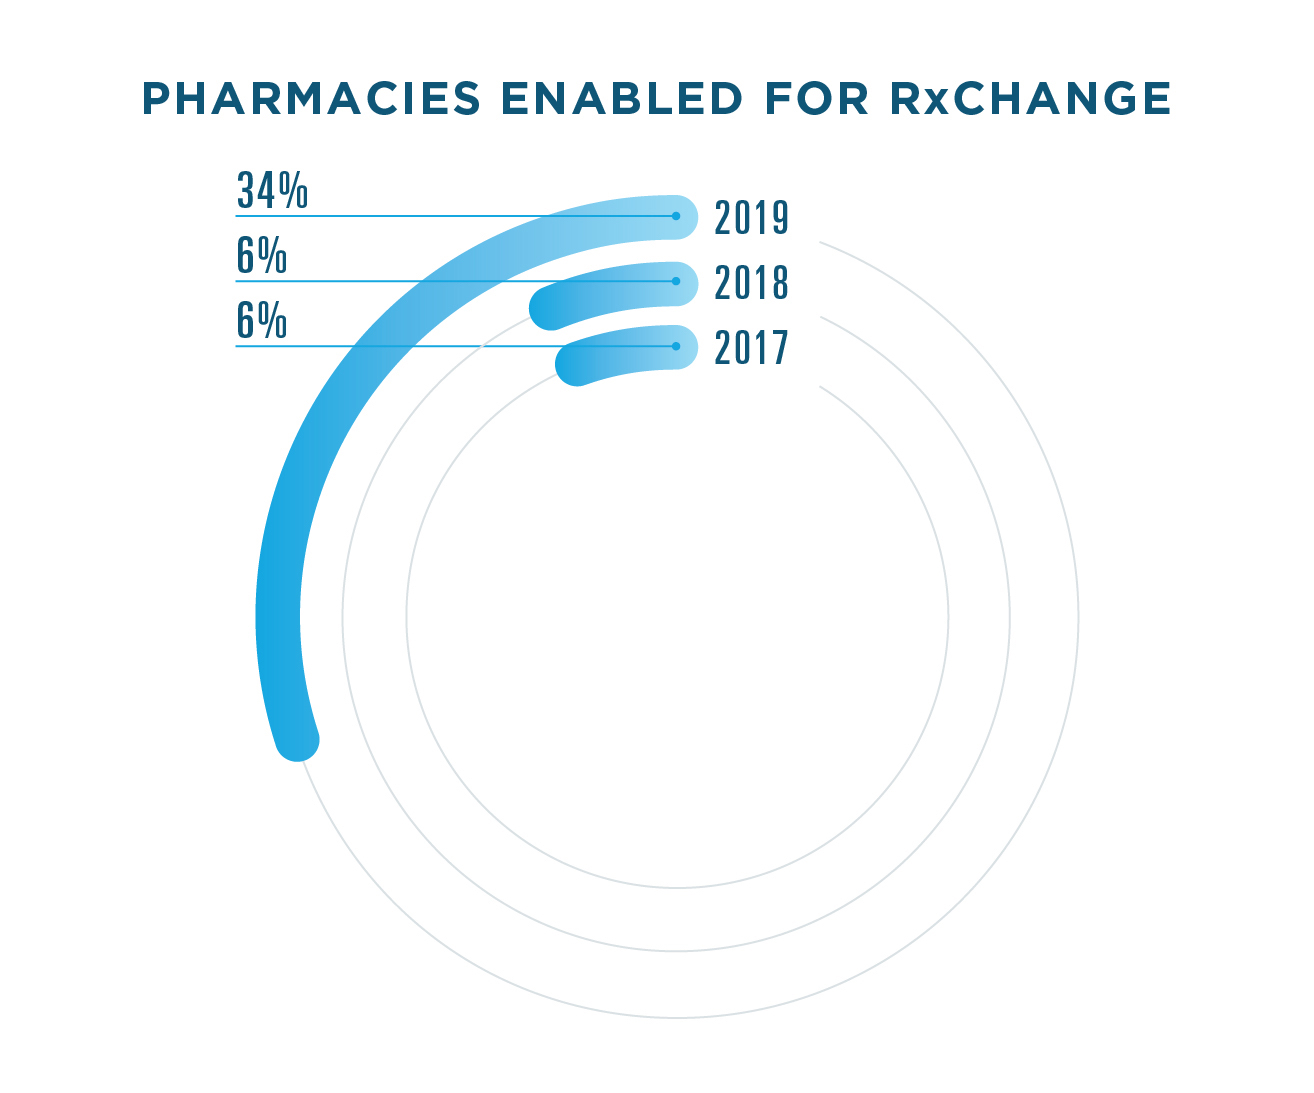 There were 11.7 million RxChange transactions in 2019, compared to 84,000 in 2018. In 2019, 34% of pharmacies were enabled for RxChange, compared to 6% in 2018 and 2017.